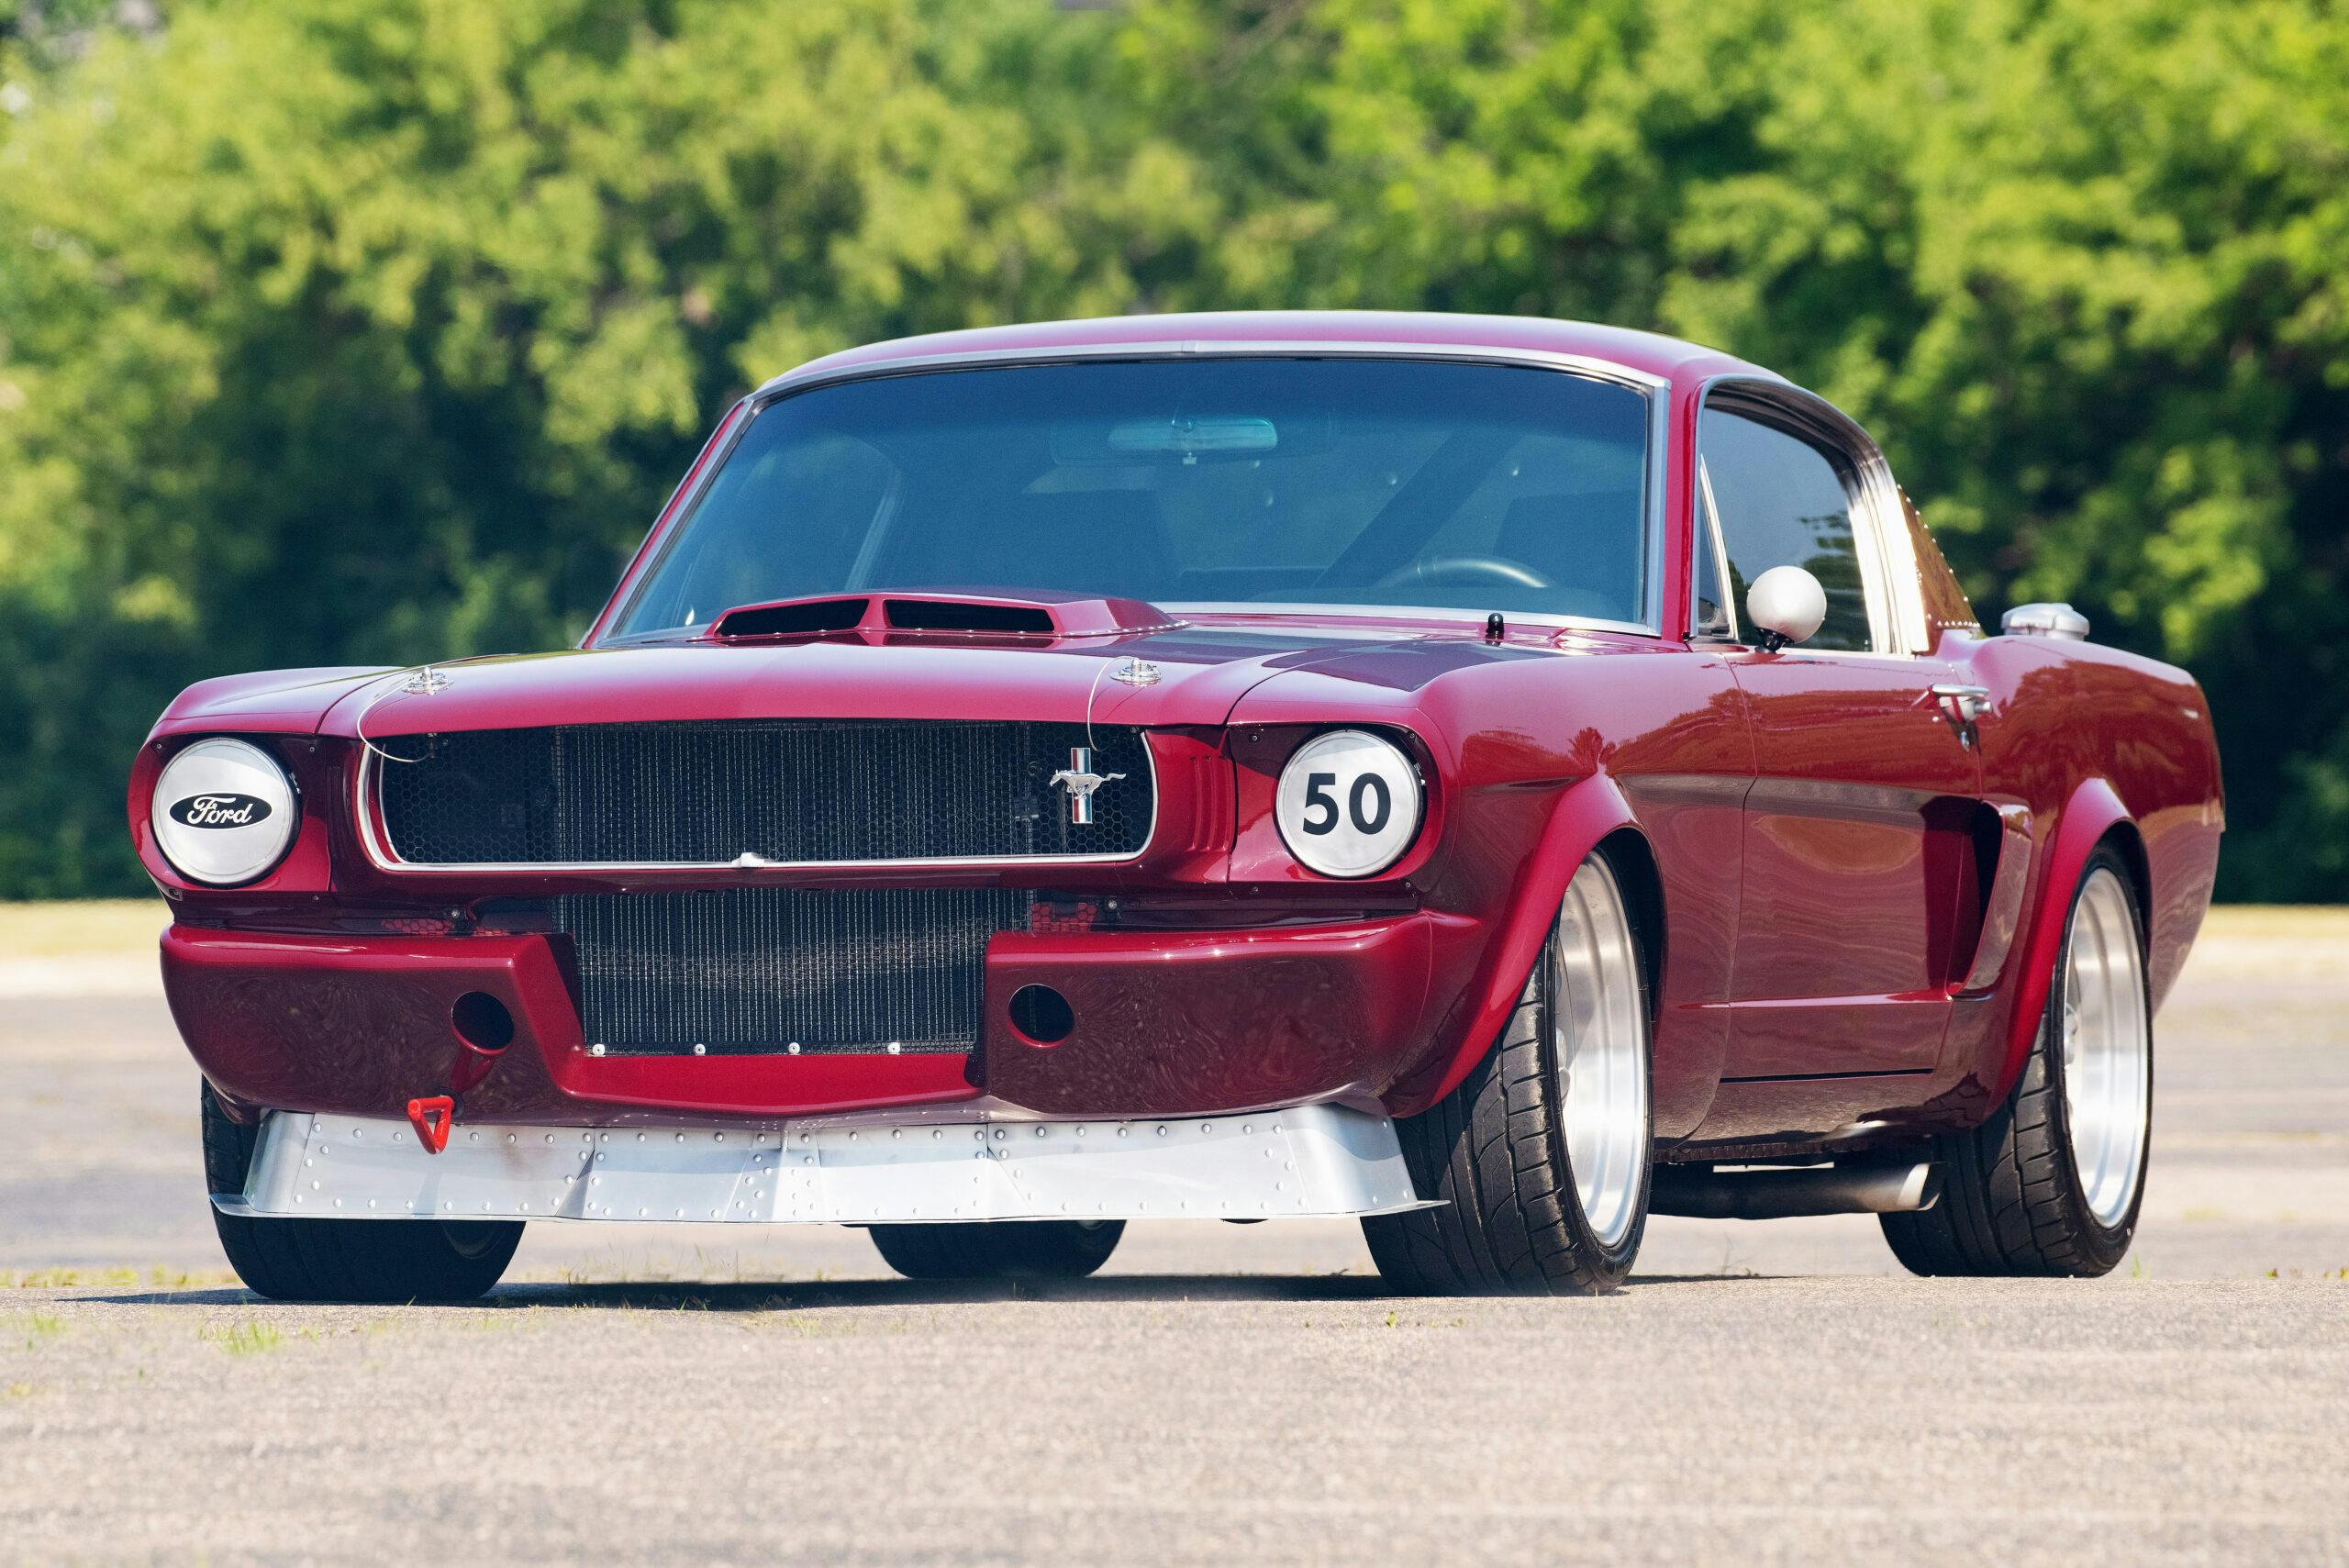 Prototype Mustang built for Henry Ford II: See what makes it so